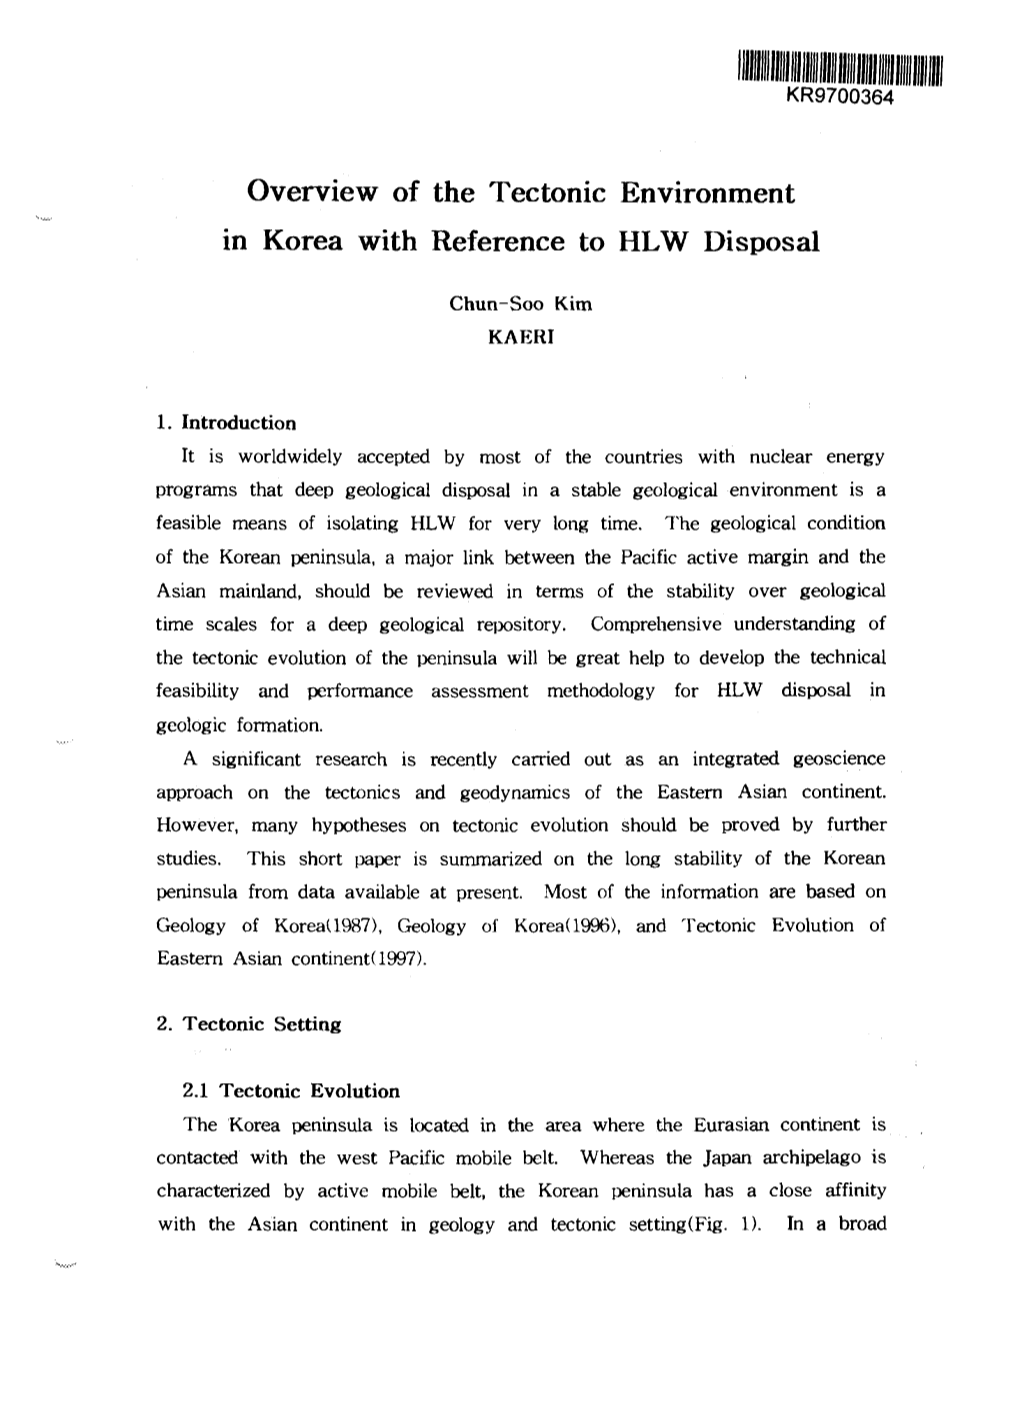 Overview of the Tectonic Environment in Korea with Reference to HLW Disposal